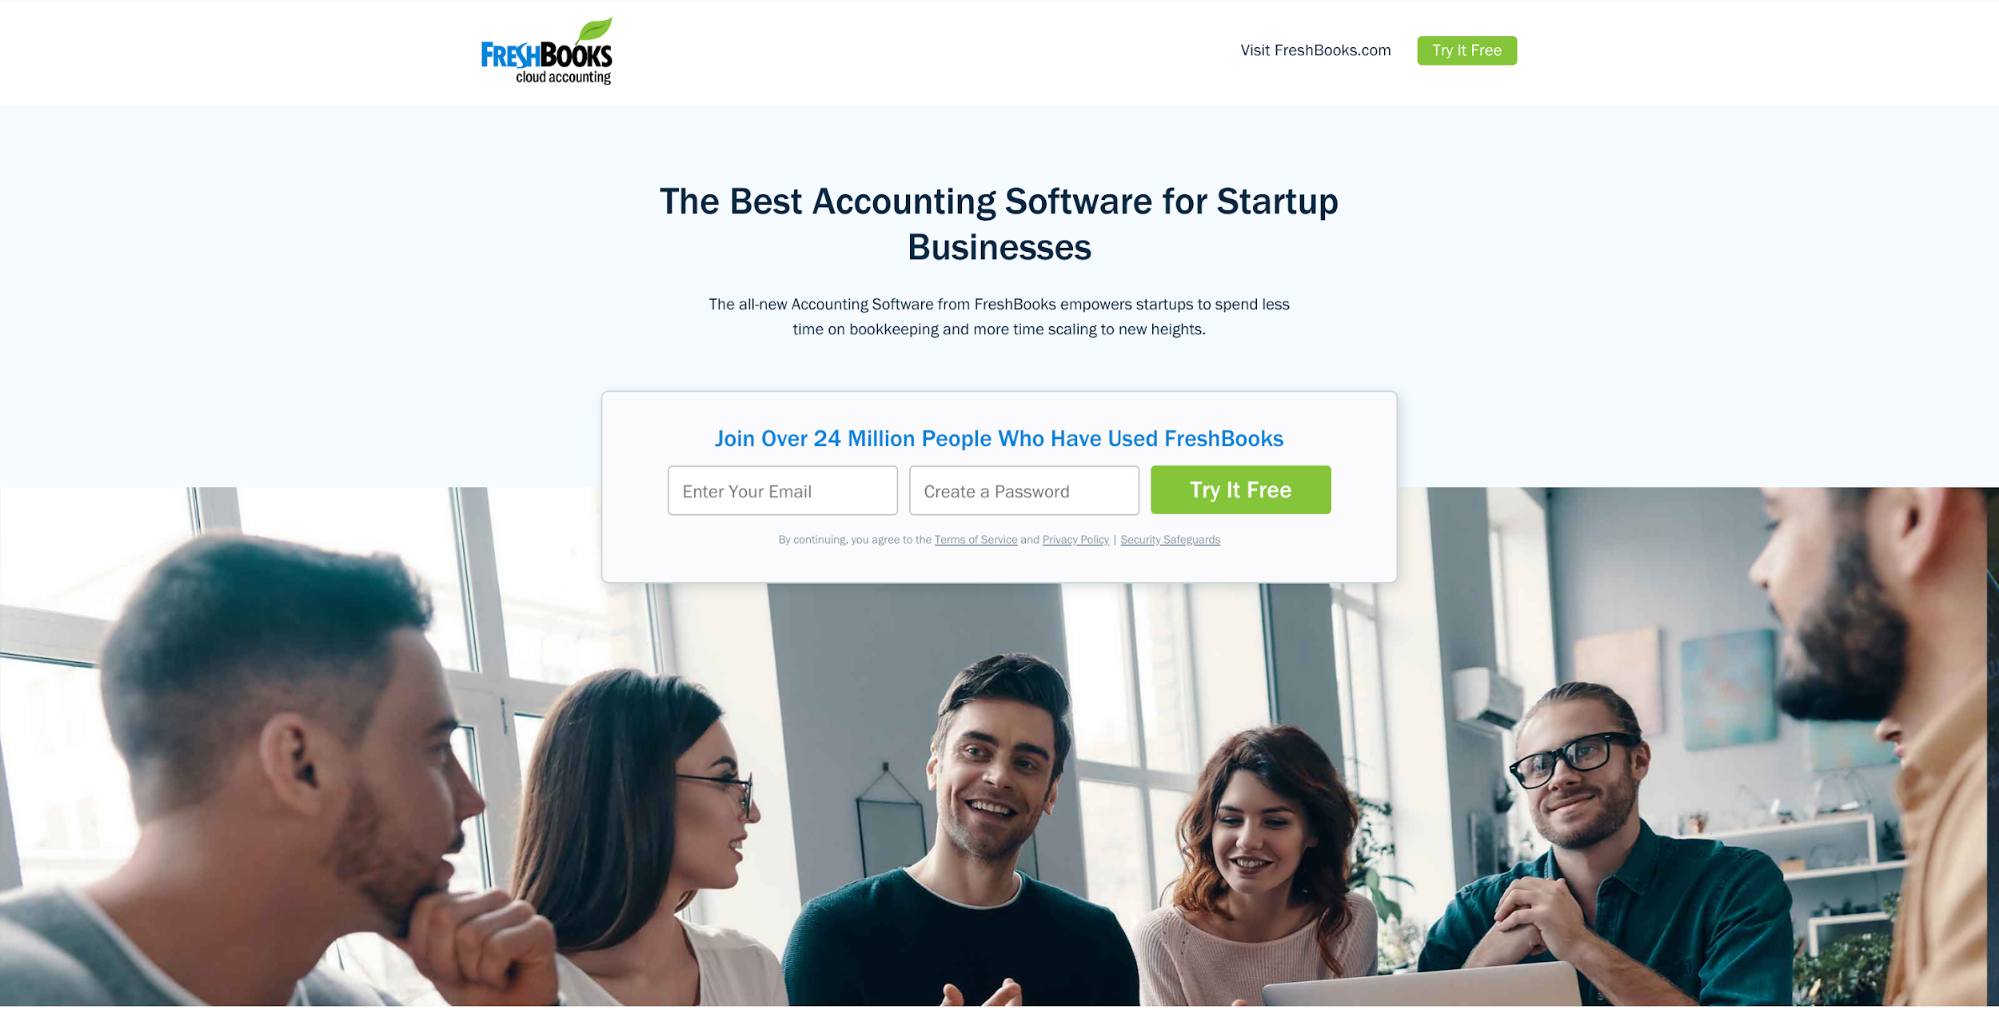 FreshBooks: Invoice and Accounting Software